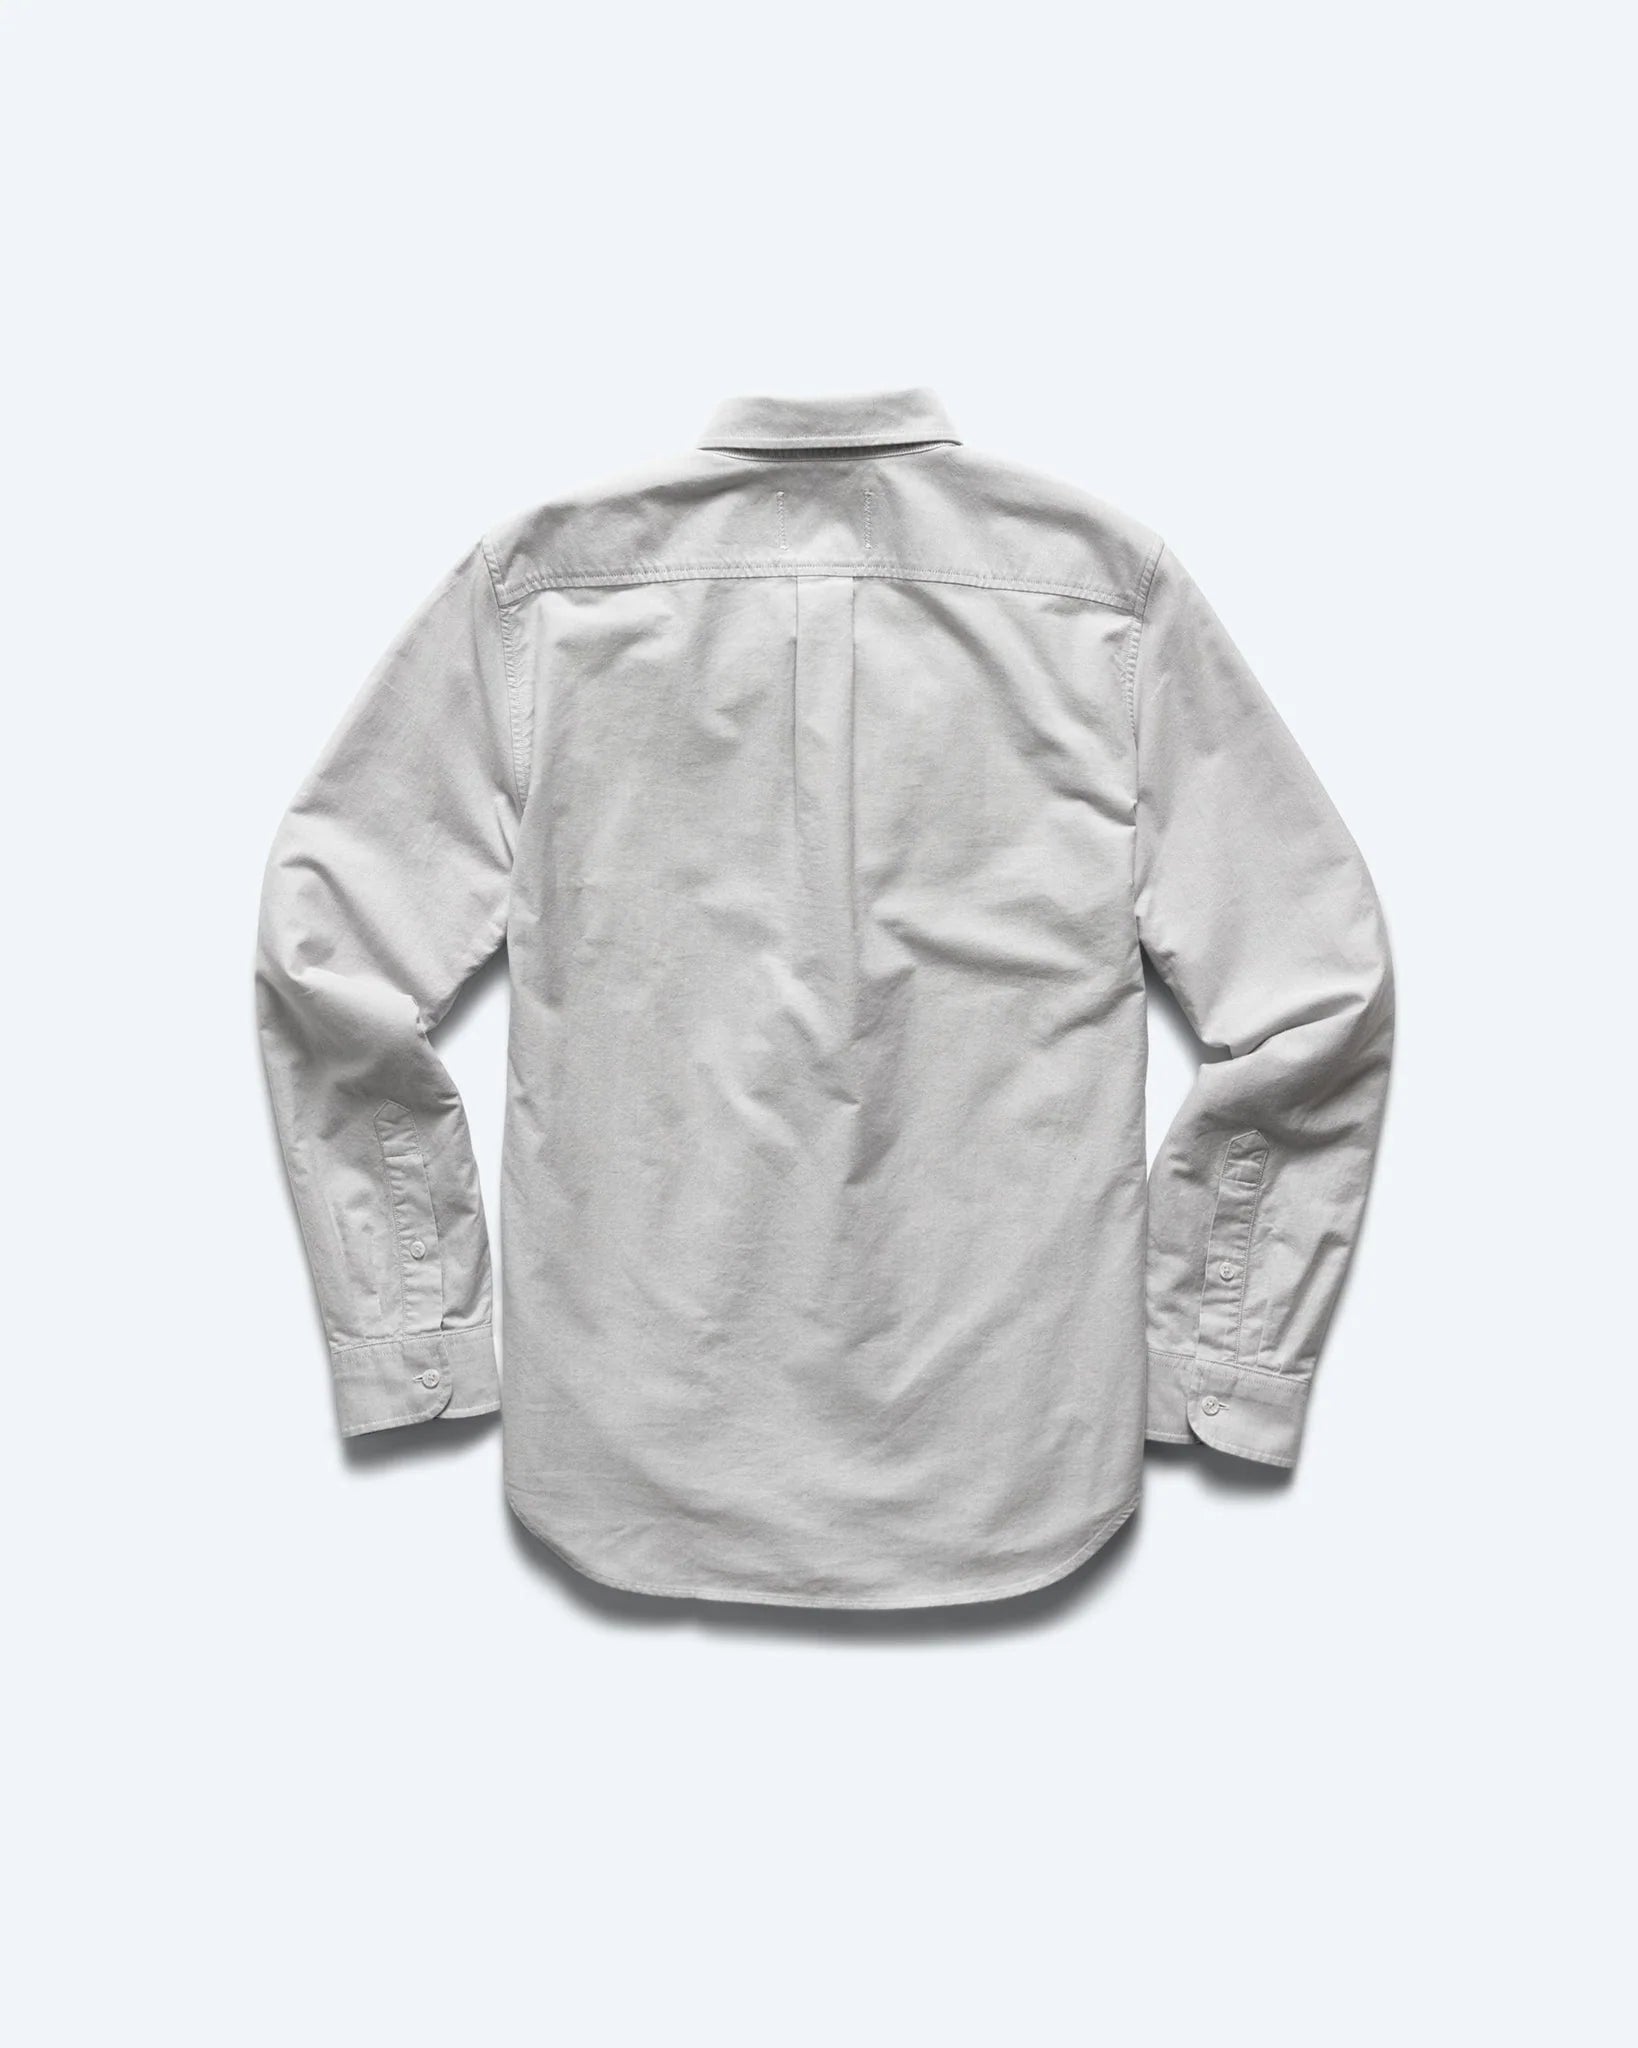 Reigning Champ Windsor Oxford Shirt in Light Grey